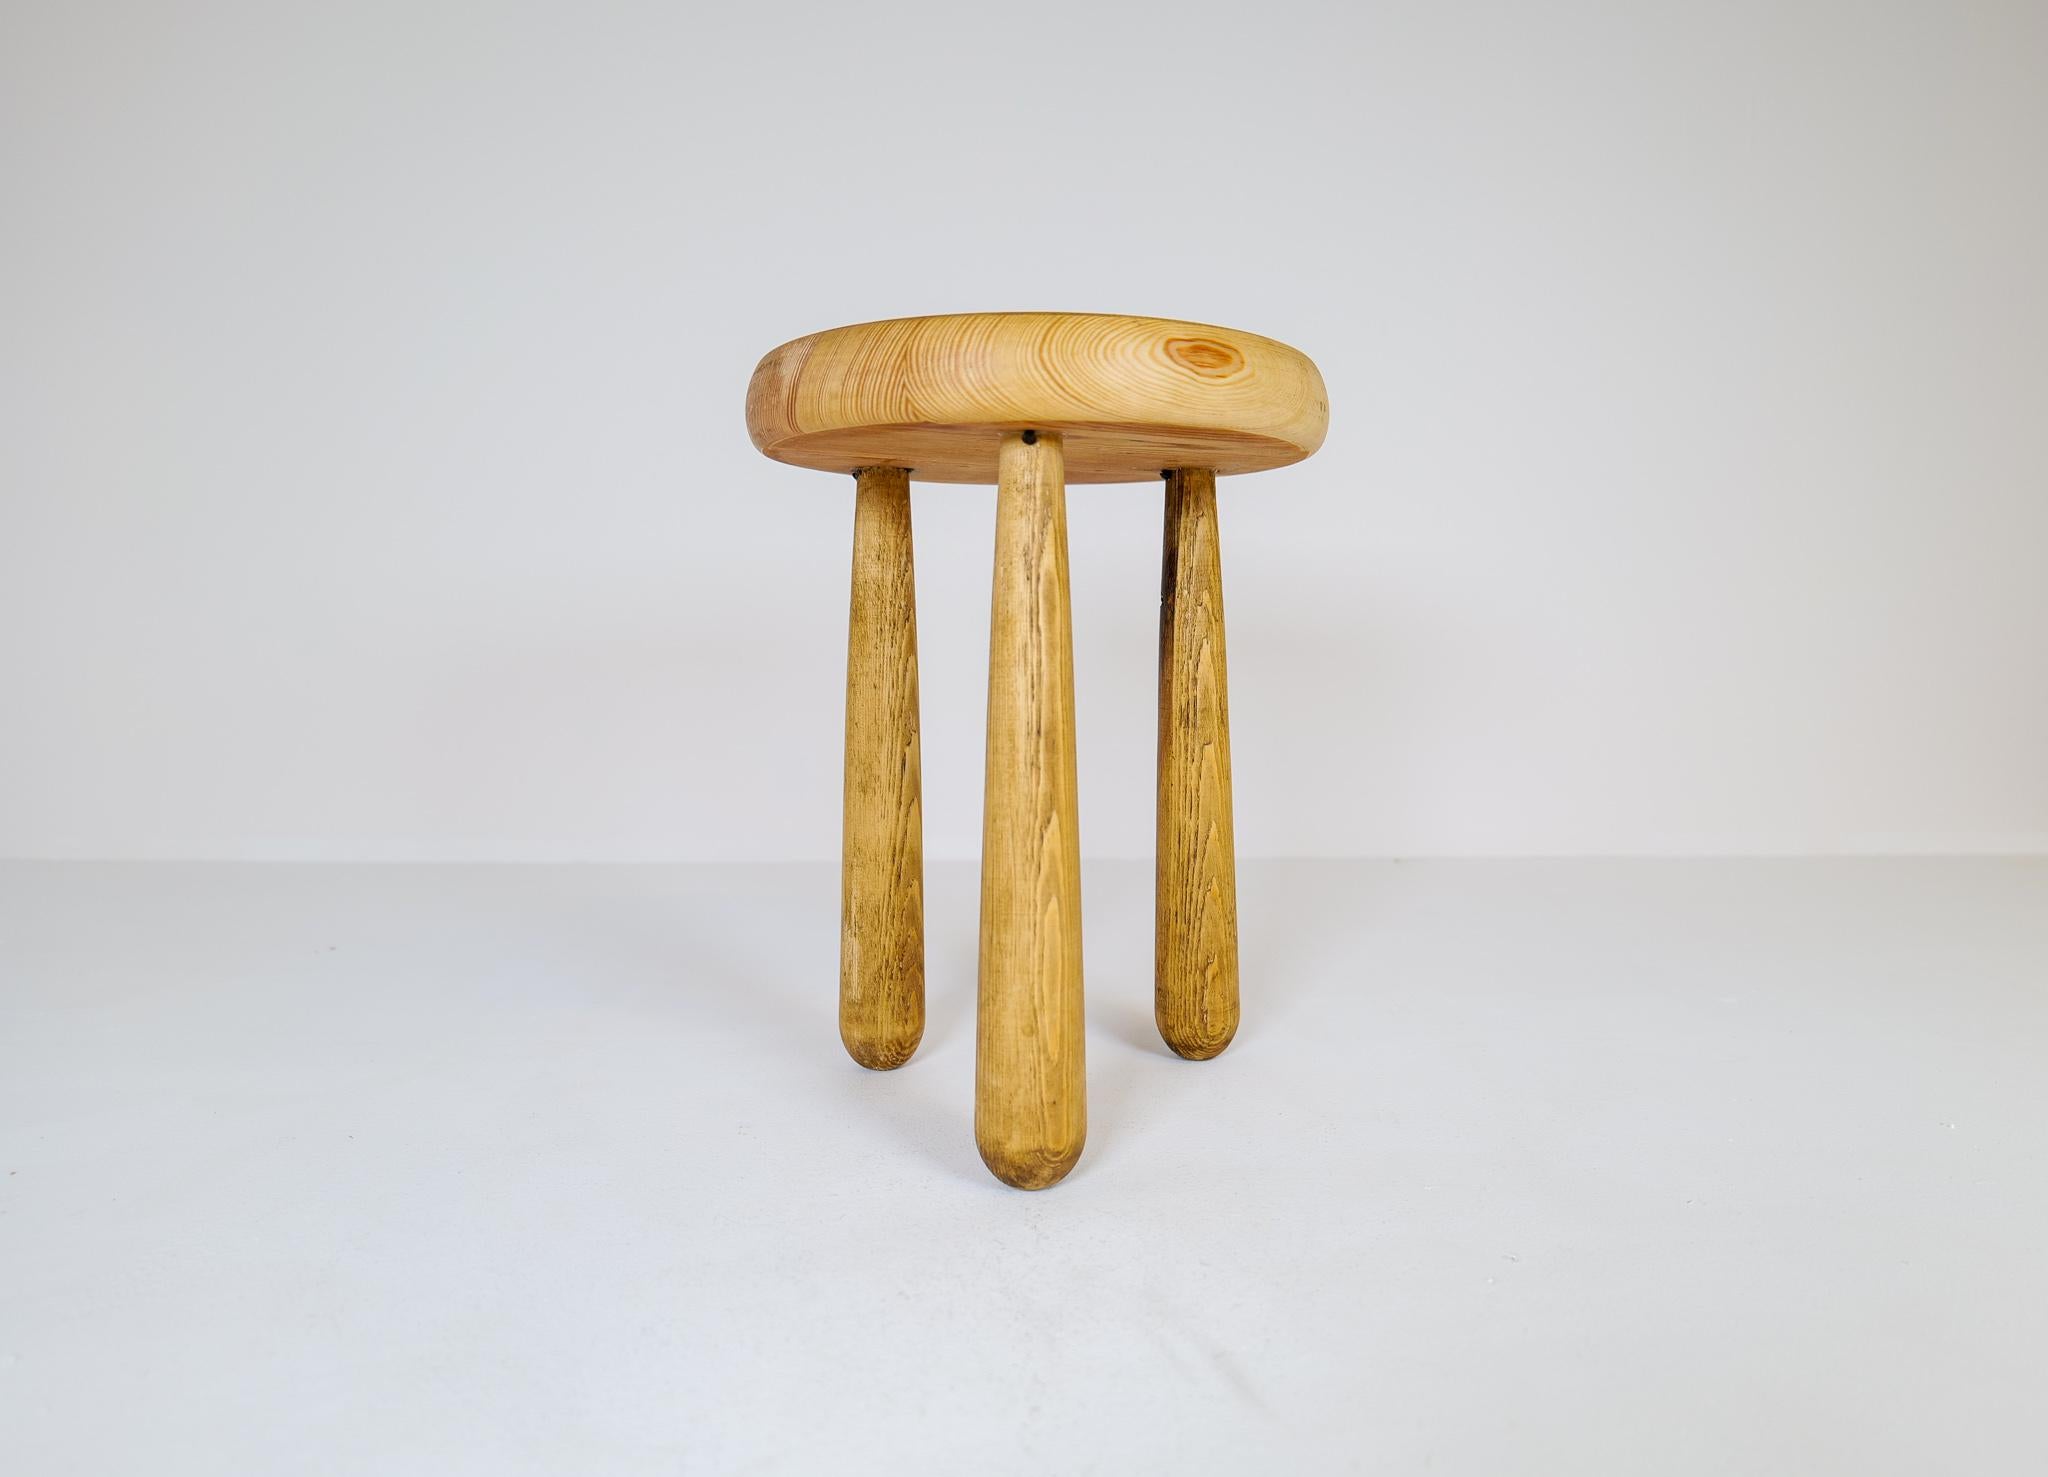 Sculptural stool in solid pine with complexity in the different colors of the wood.
This stool is a good example of the good craftsmanship and minimalistic stile to come in Scandinavian furniture. 

Good original condition with a beautiful patina